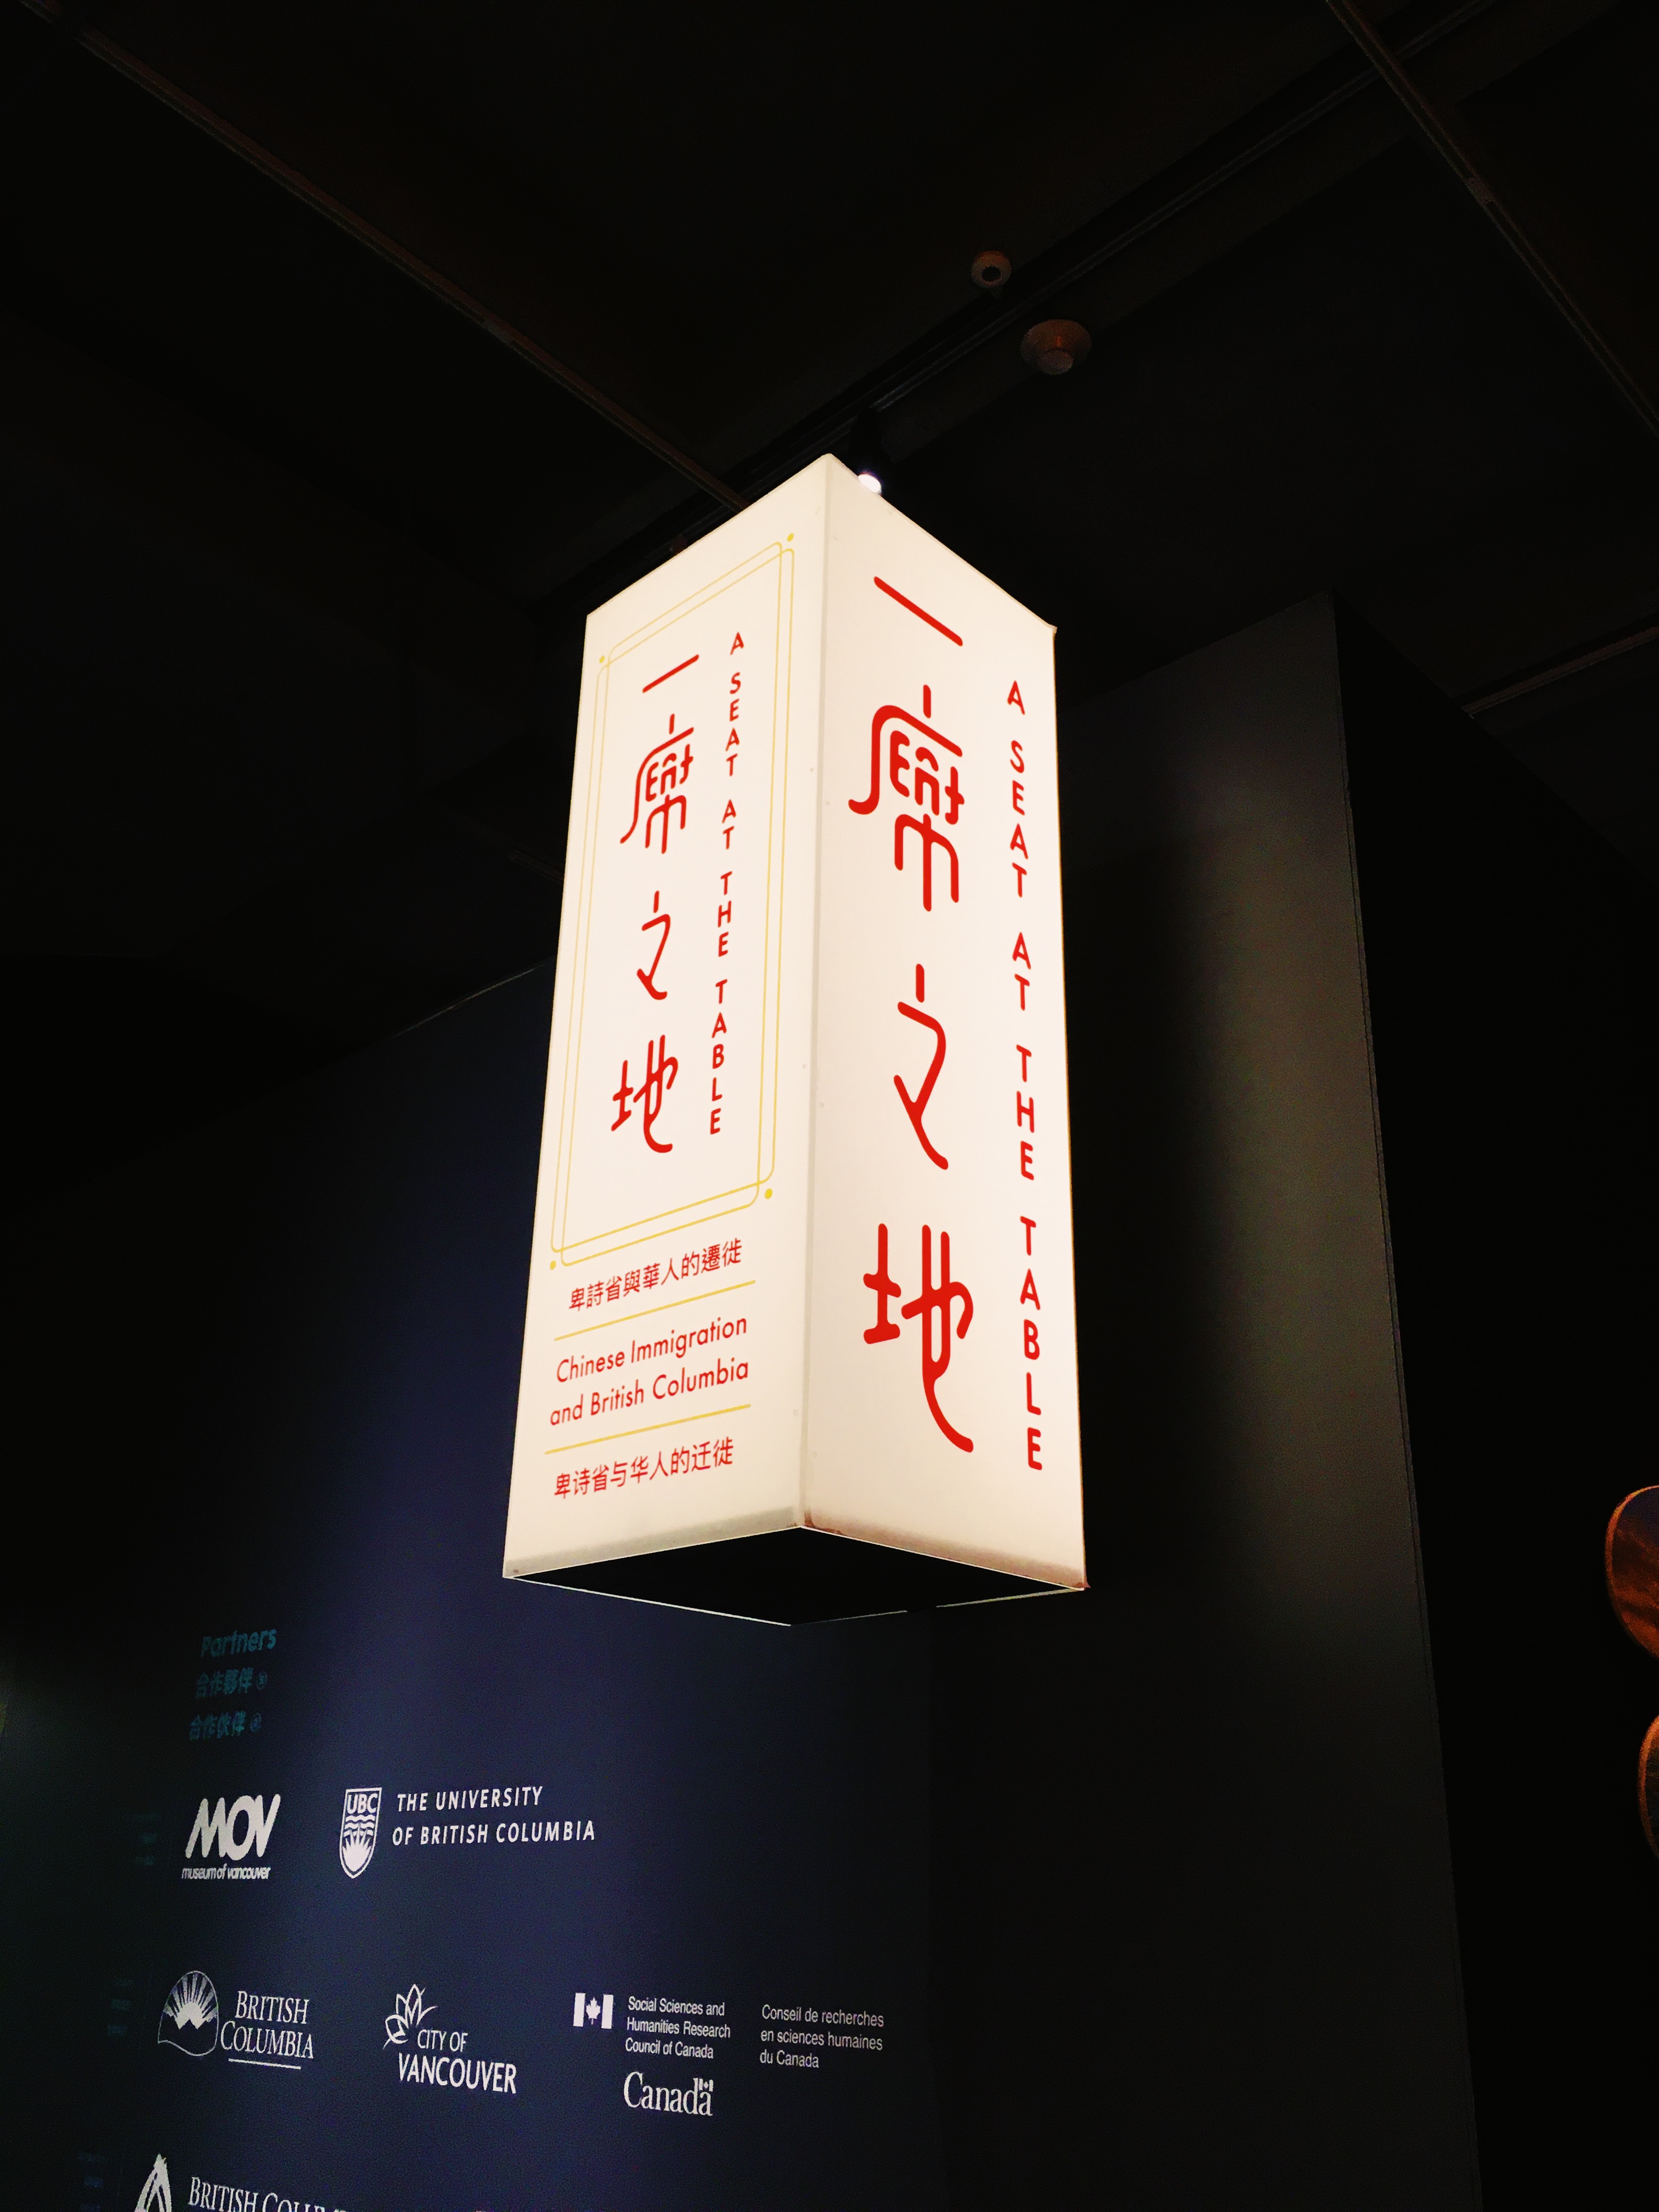 Exhibit sign that reads 'A Seat at the Table'. The sign is a tall white box with red text, in both English and Chinese.